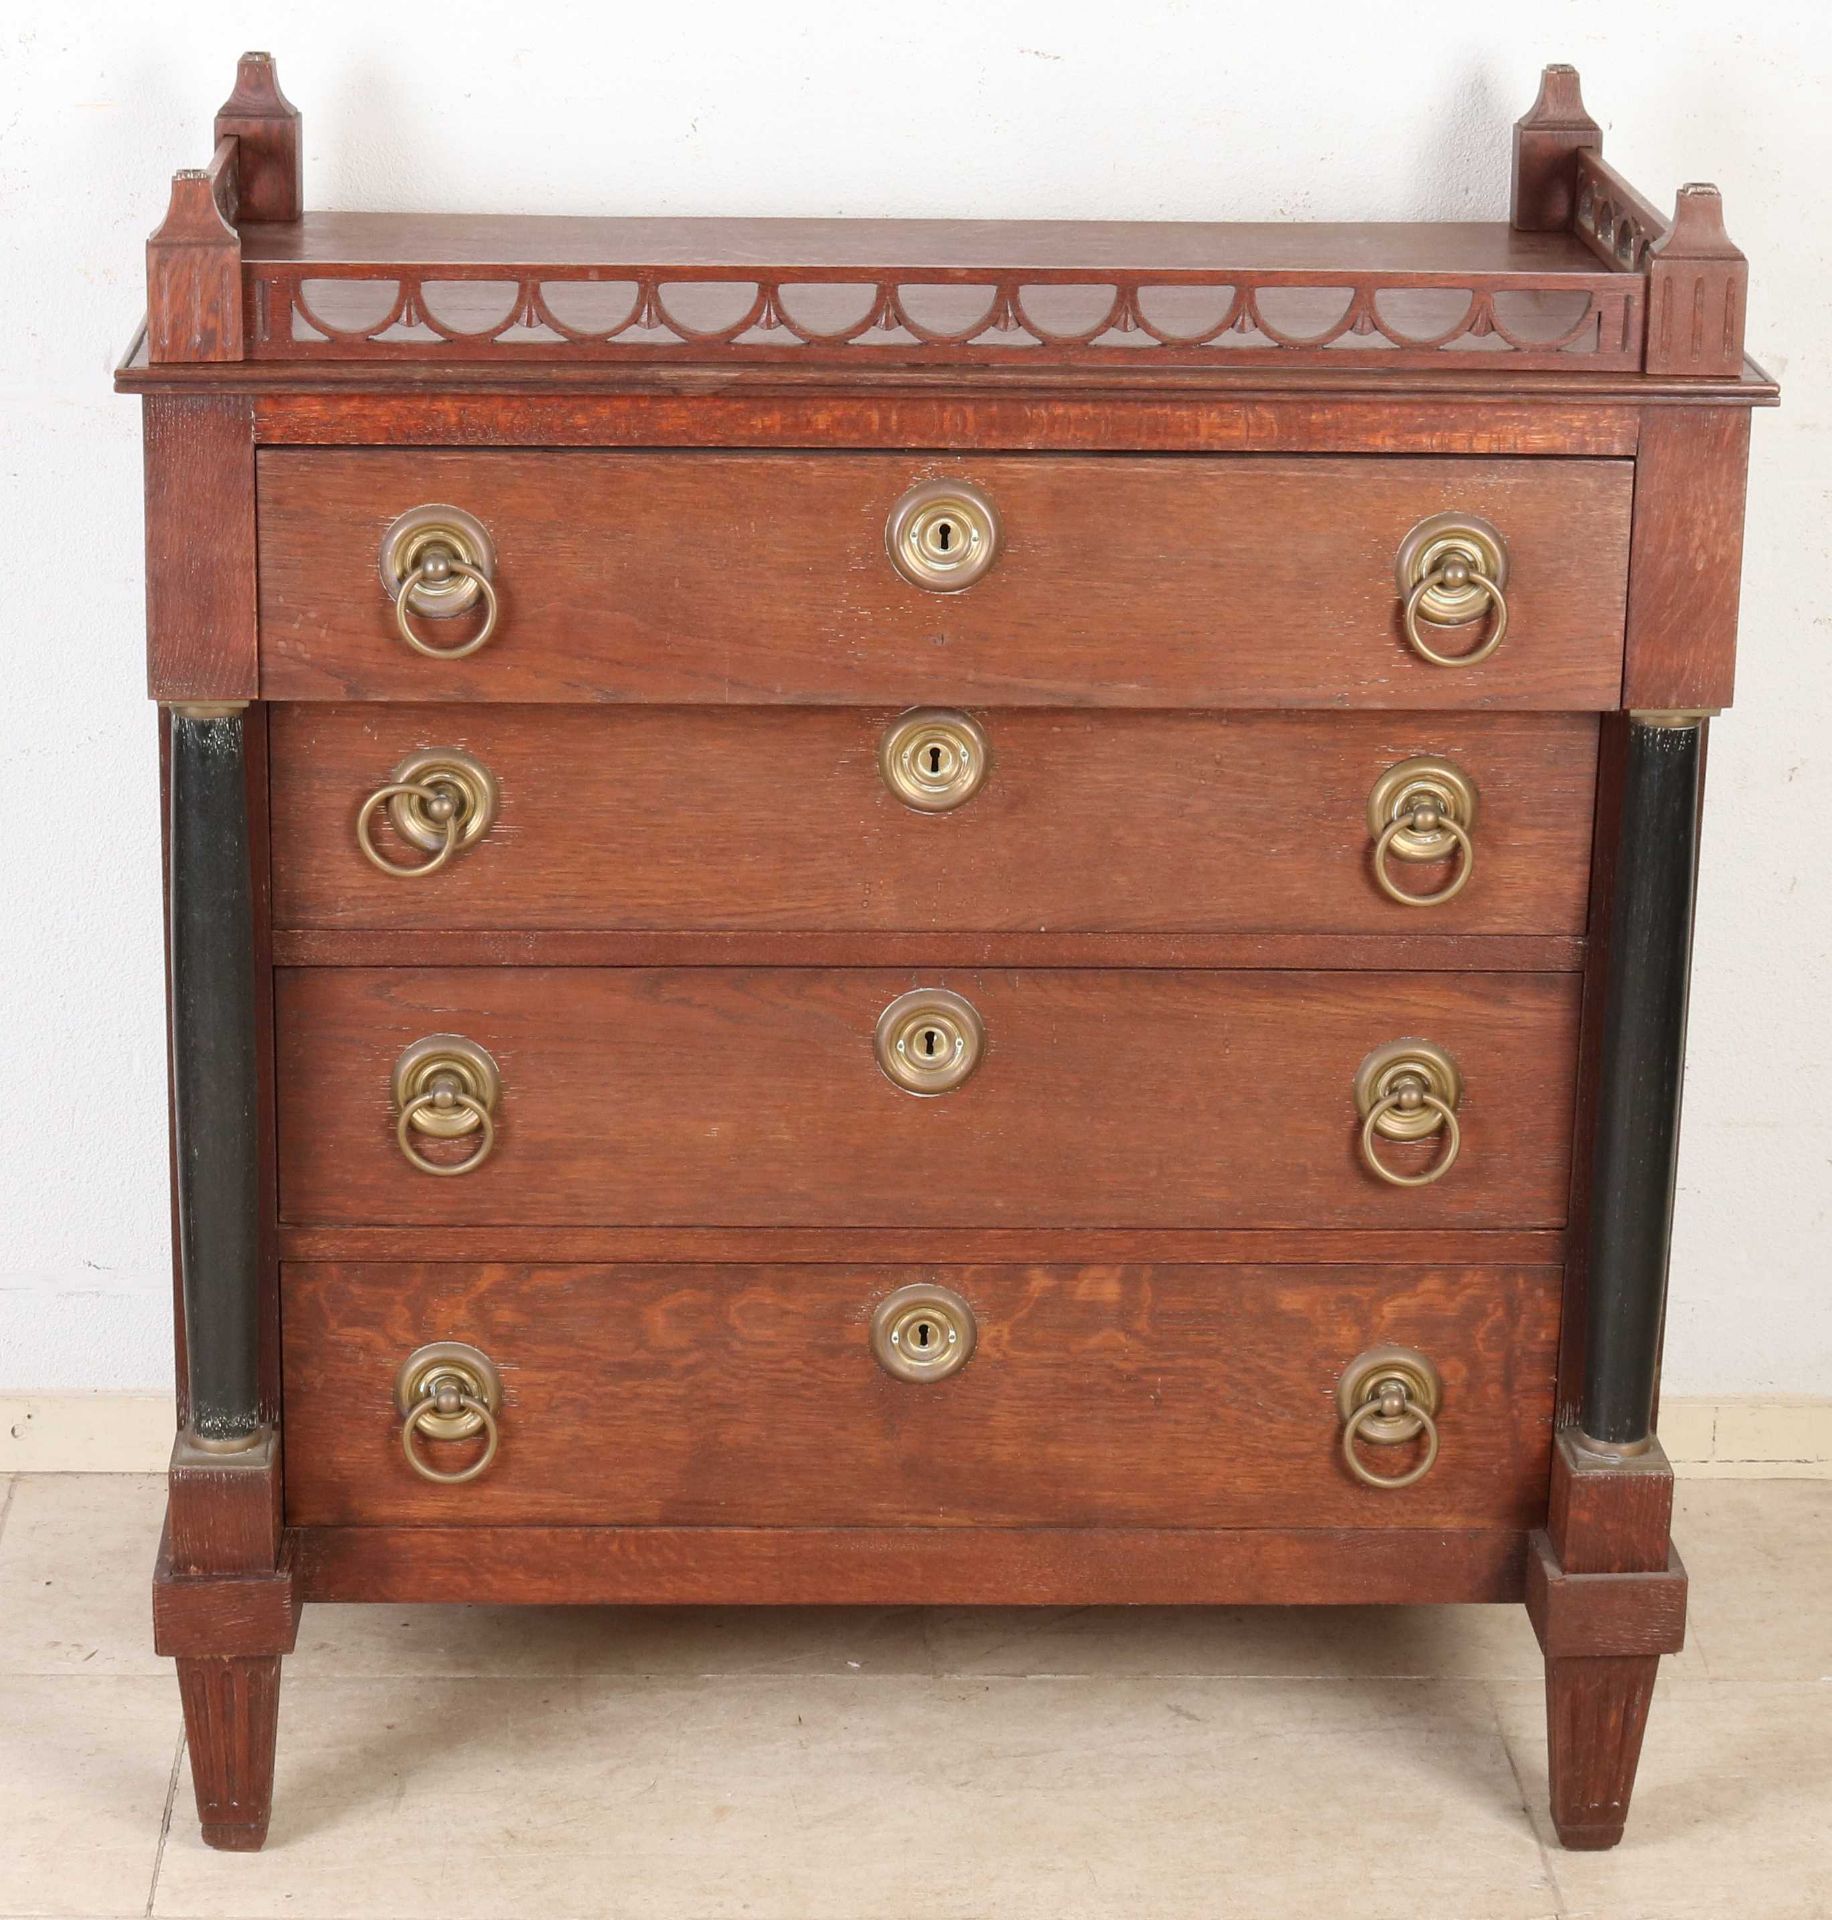 Oak chest of drawers, 1800